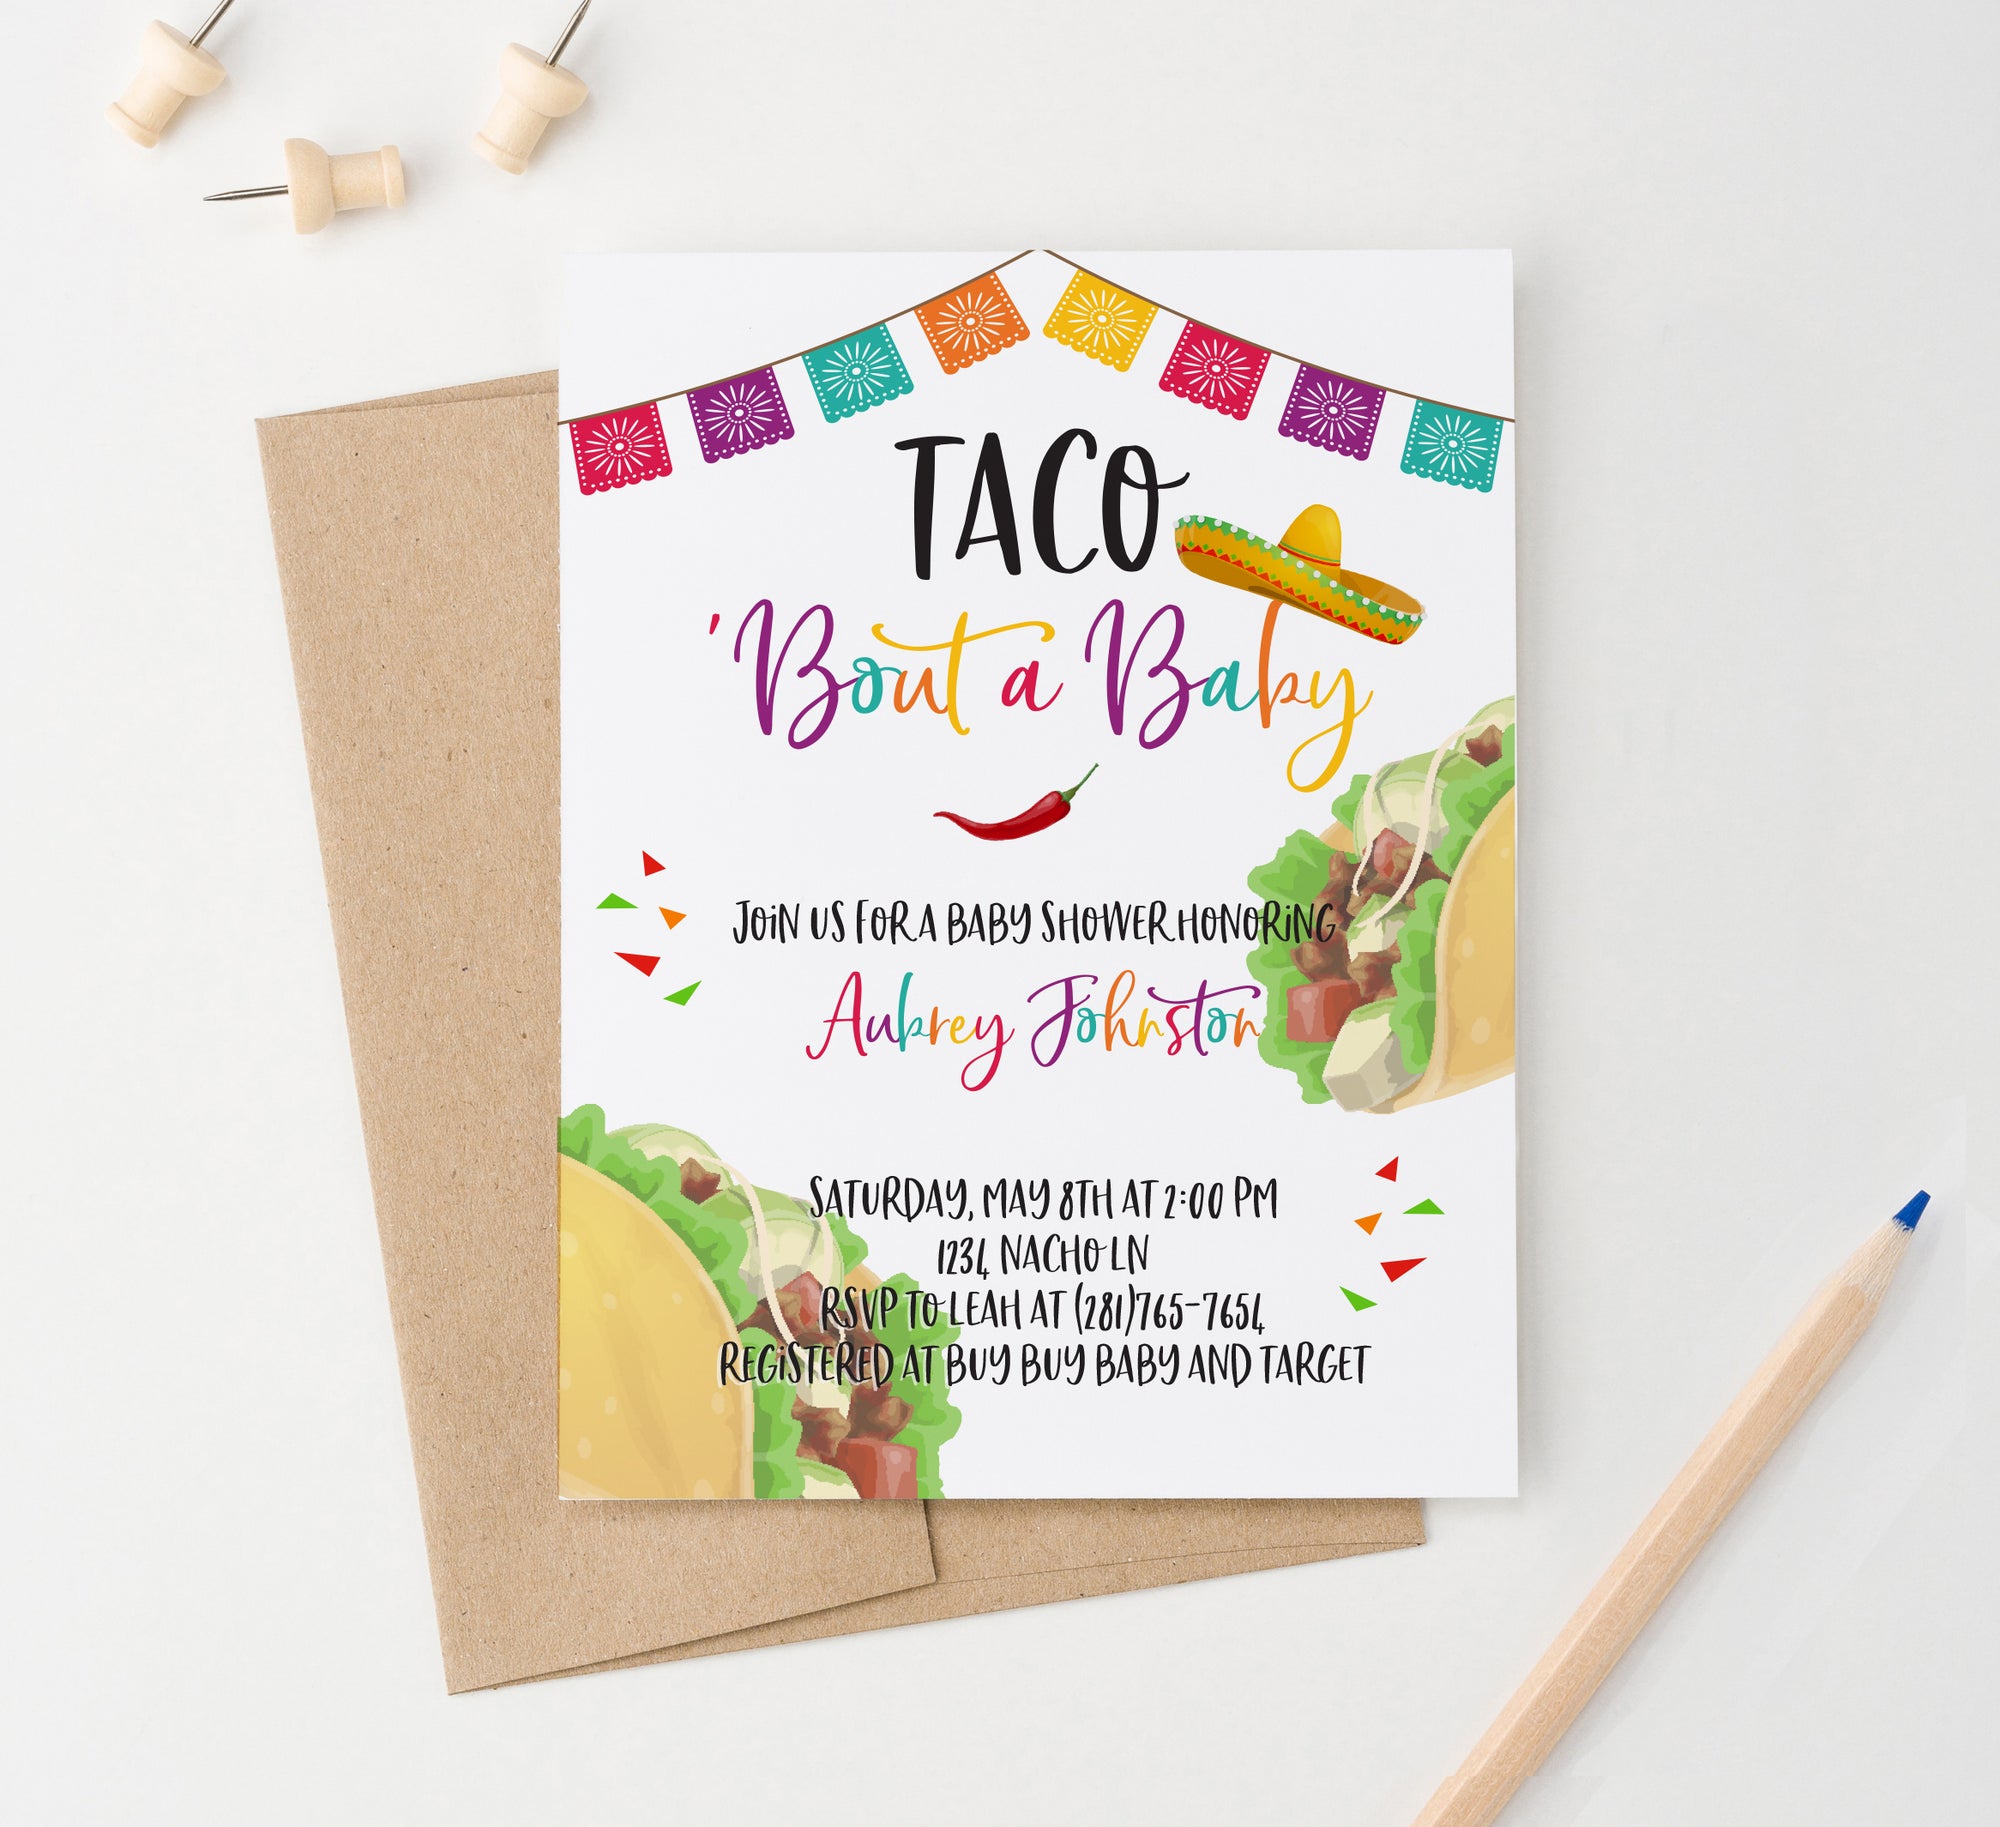 Taco Bout A Baby Baby Shower Invitations Personalized